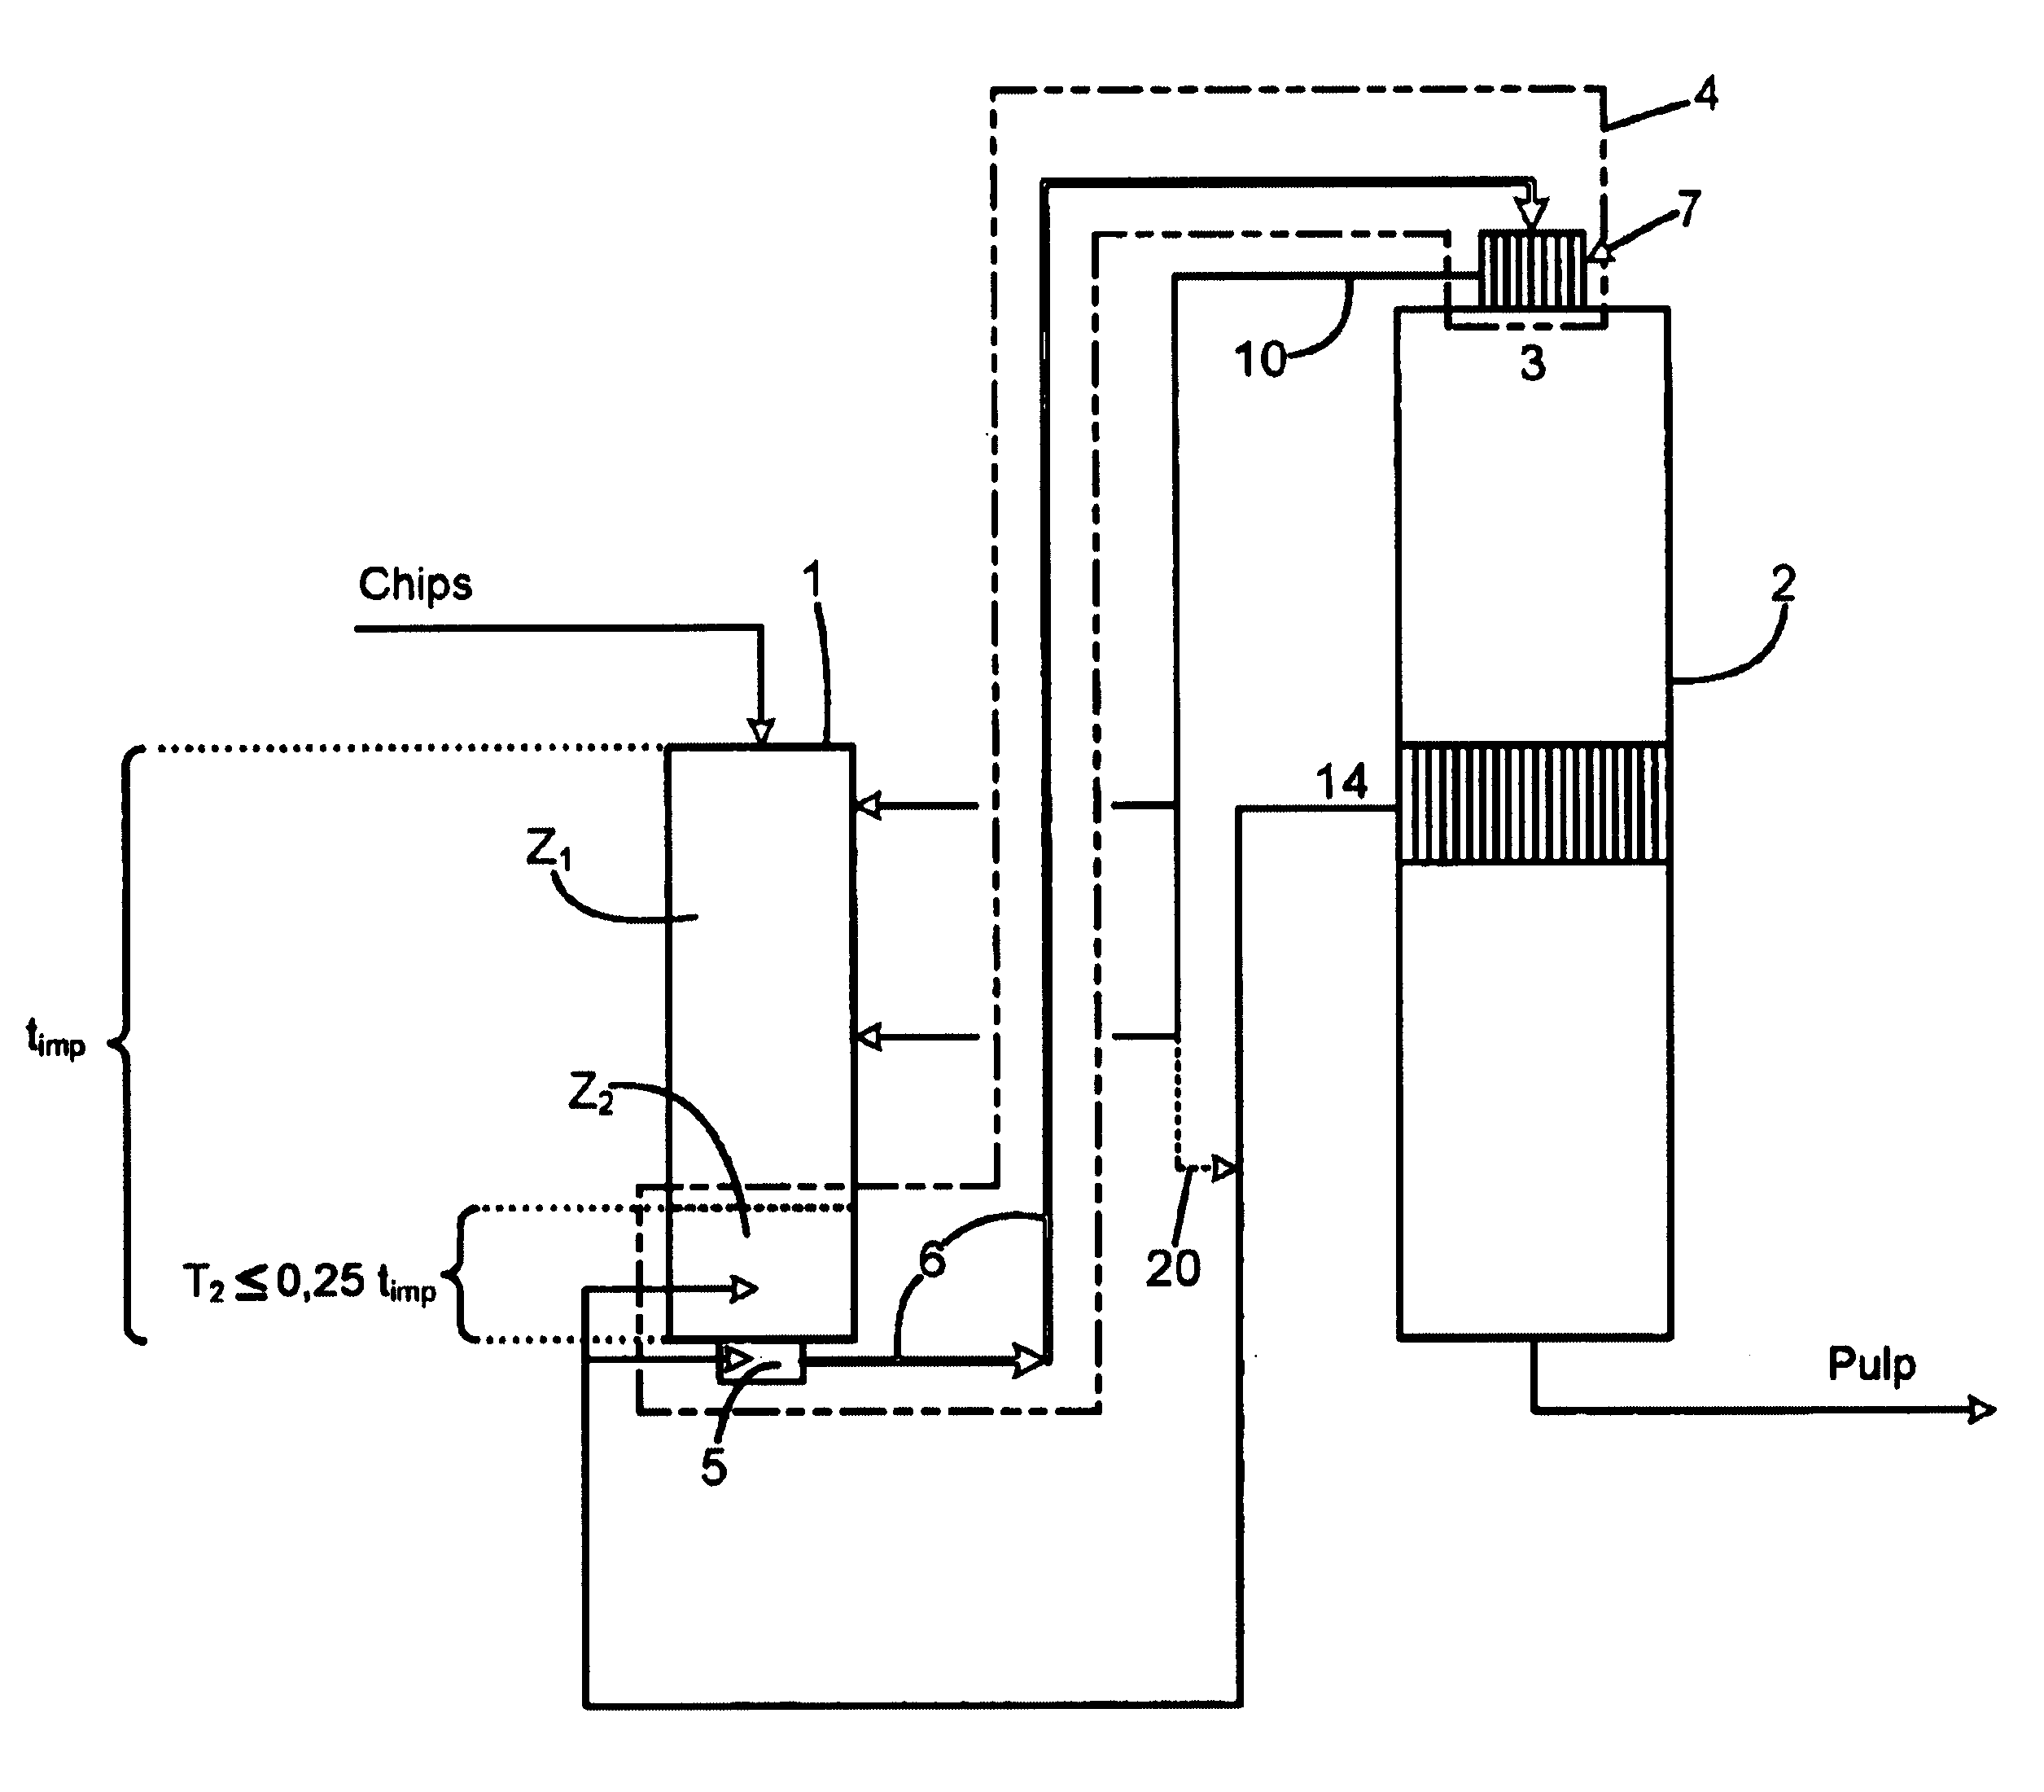 Method for continuous cooking of chemical pulp to improve heat economy